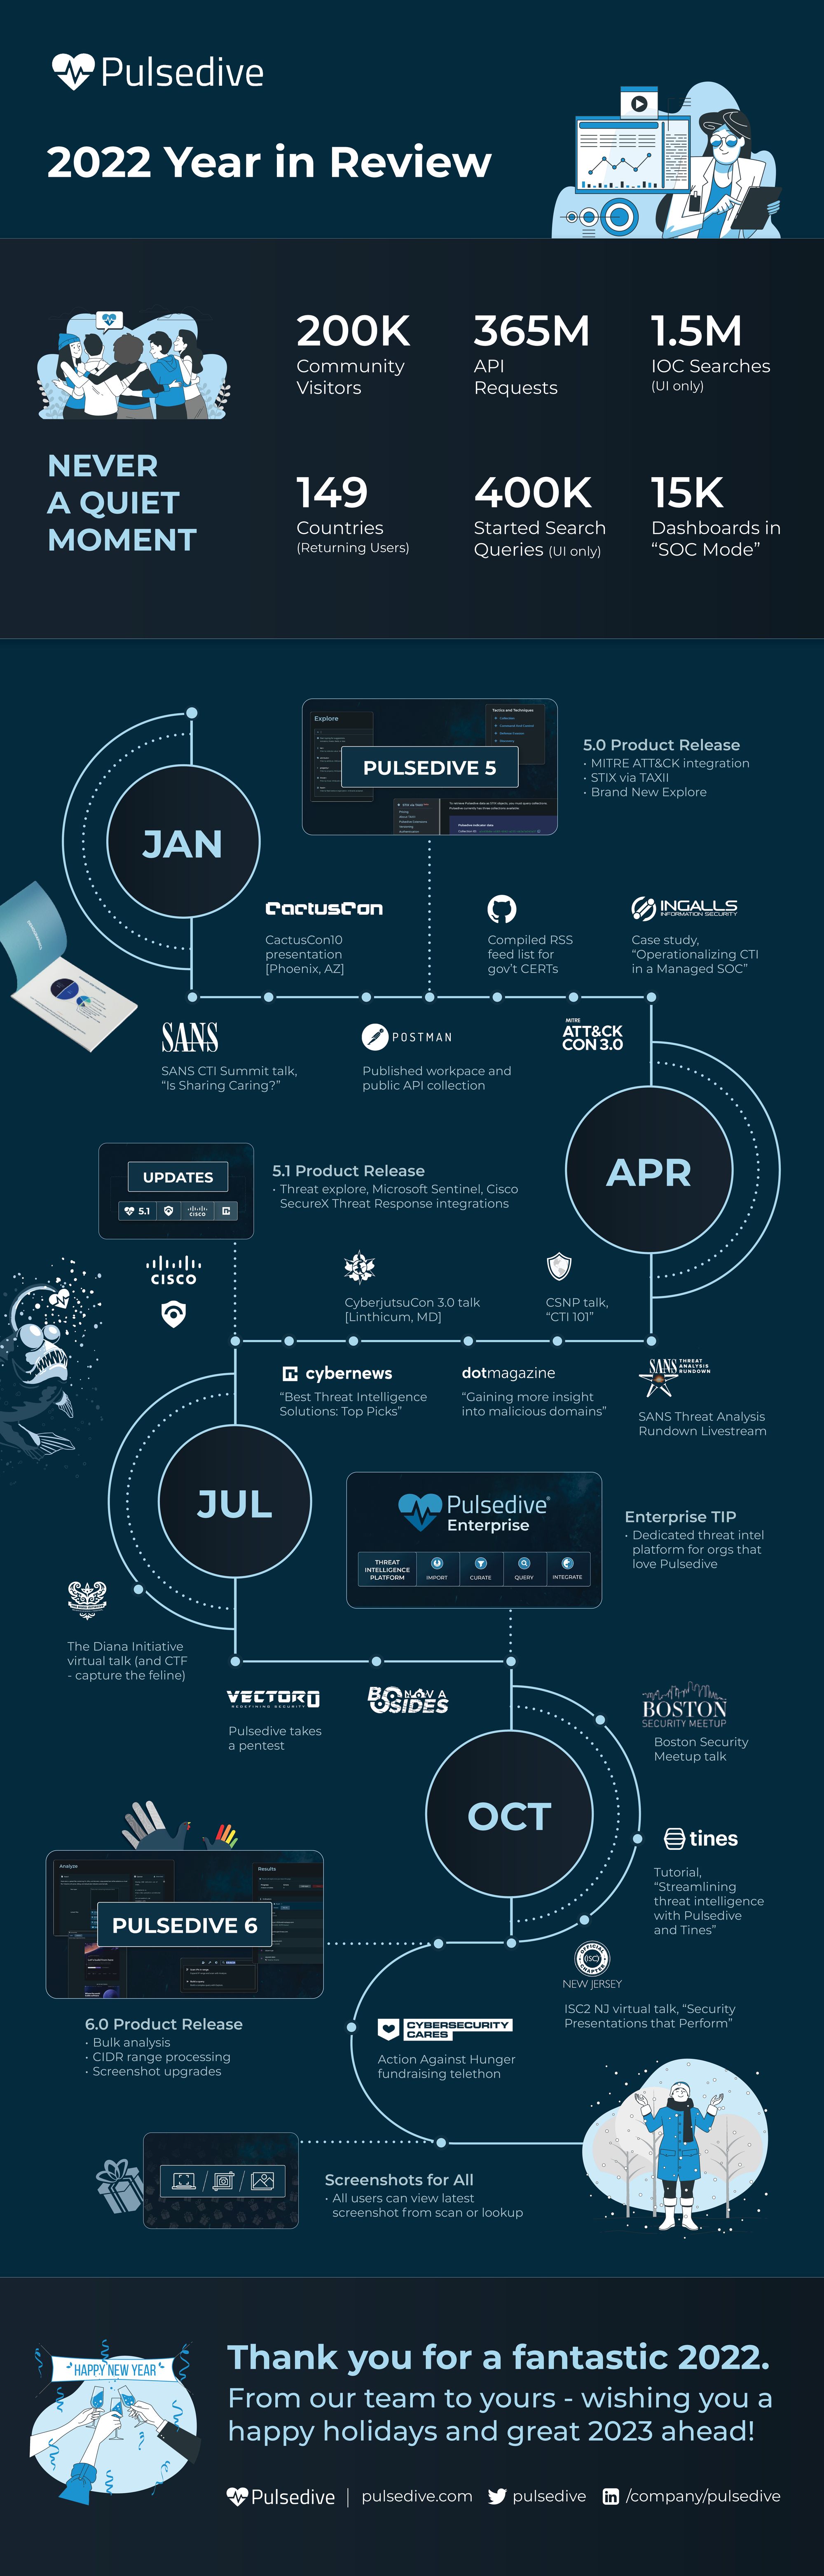 Pulsedive 2022 Year in Review Timeline Infographic